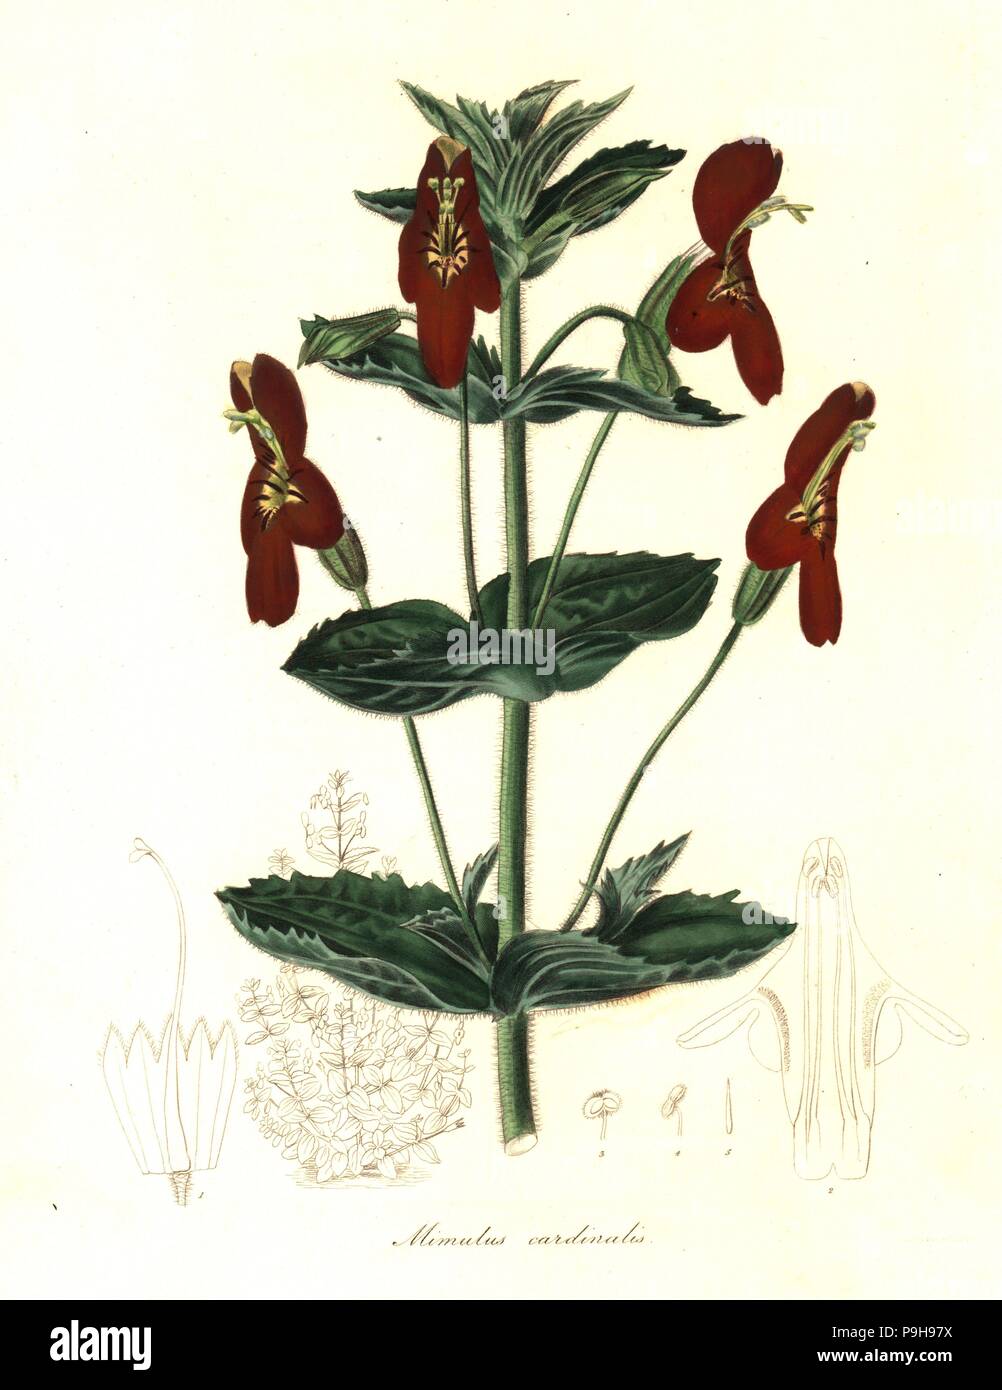 Mimulus roseus x Mimulus cardinalis. Hodson's hybrid mimulus, Mimulus roseo-cardinalis. Handcoloured copperplate engraving after a botanical illustration from Benjamin Maund and the Rev. John Stevens Henslow's The Botanist, London, 1836. Stock Photo